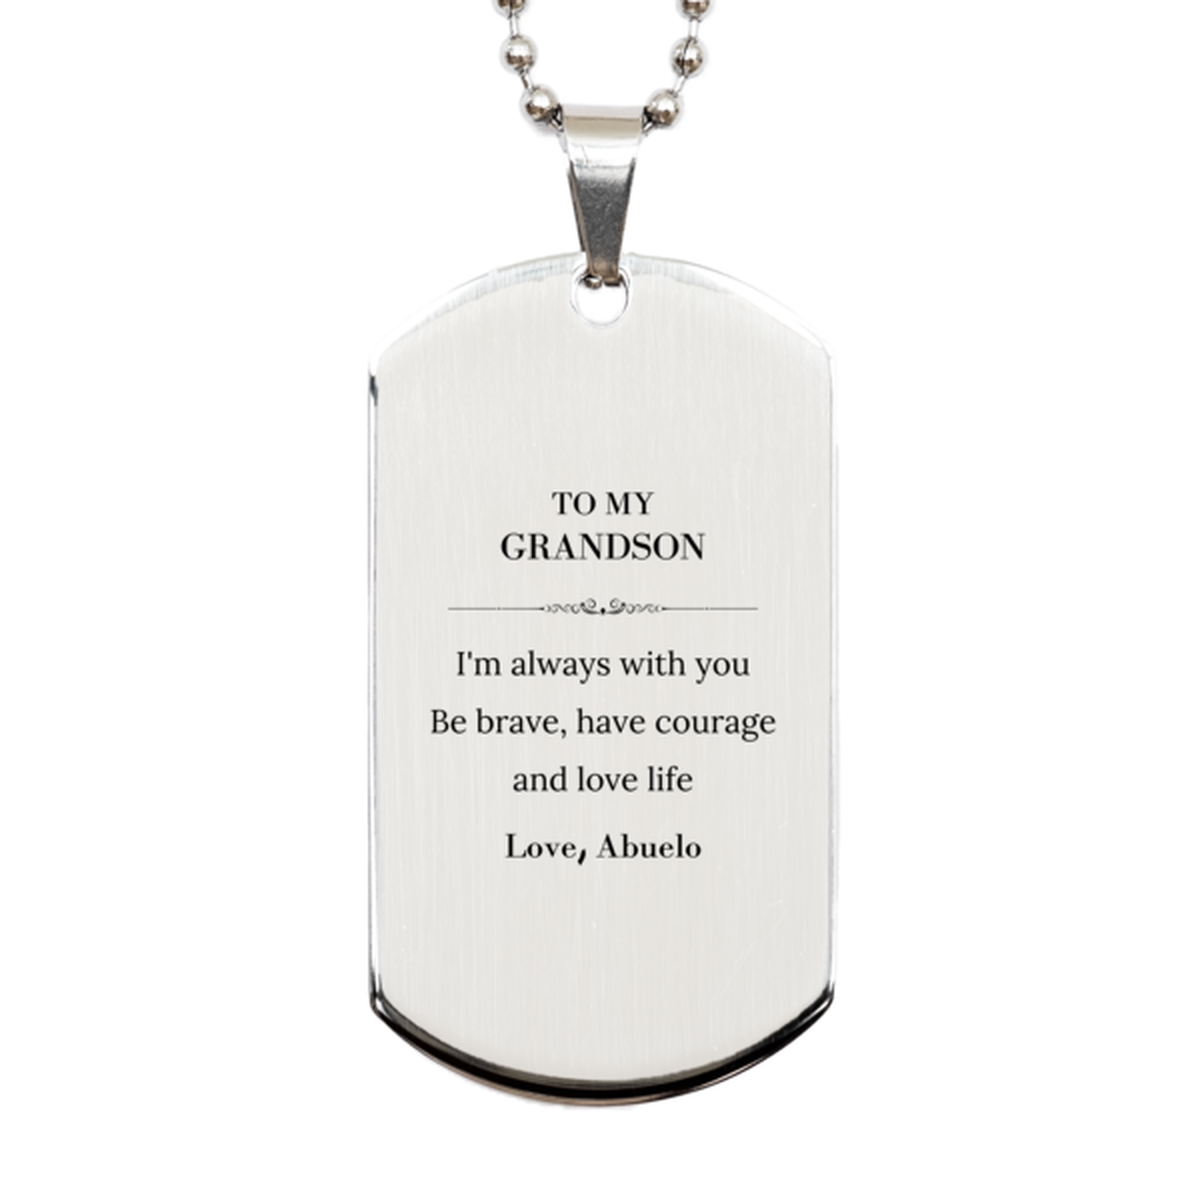 To My Grandson Gifts from Abuelo, Unique Silver Dog Tag Inspirational Christmas Birthday Graduation Gifts for Grandson I'm always with you. Be brave, have courage and love life. Love, Abuelo